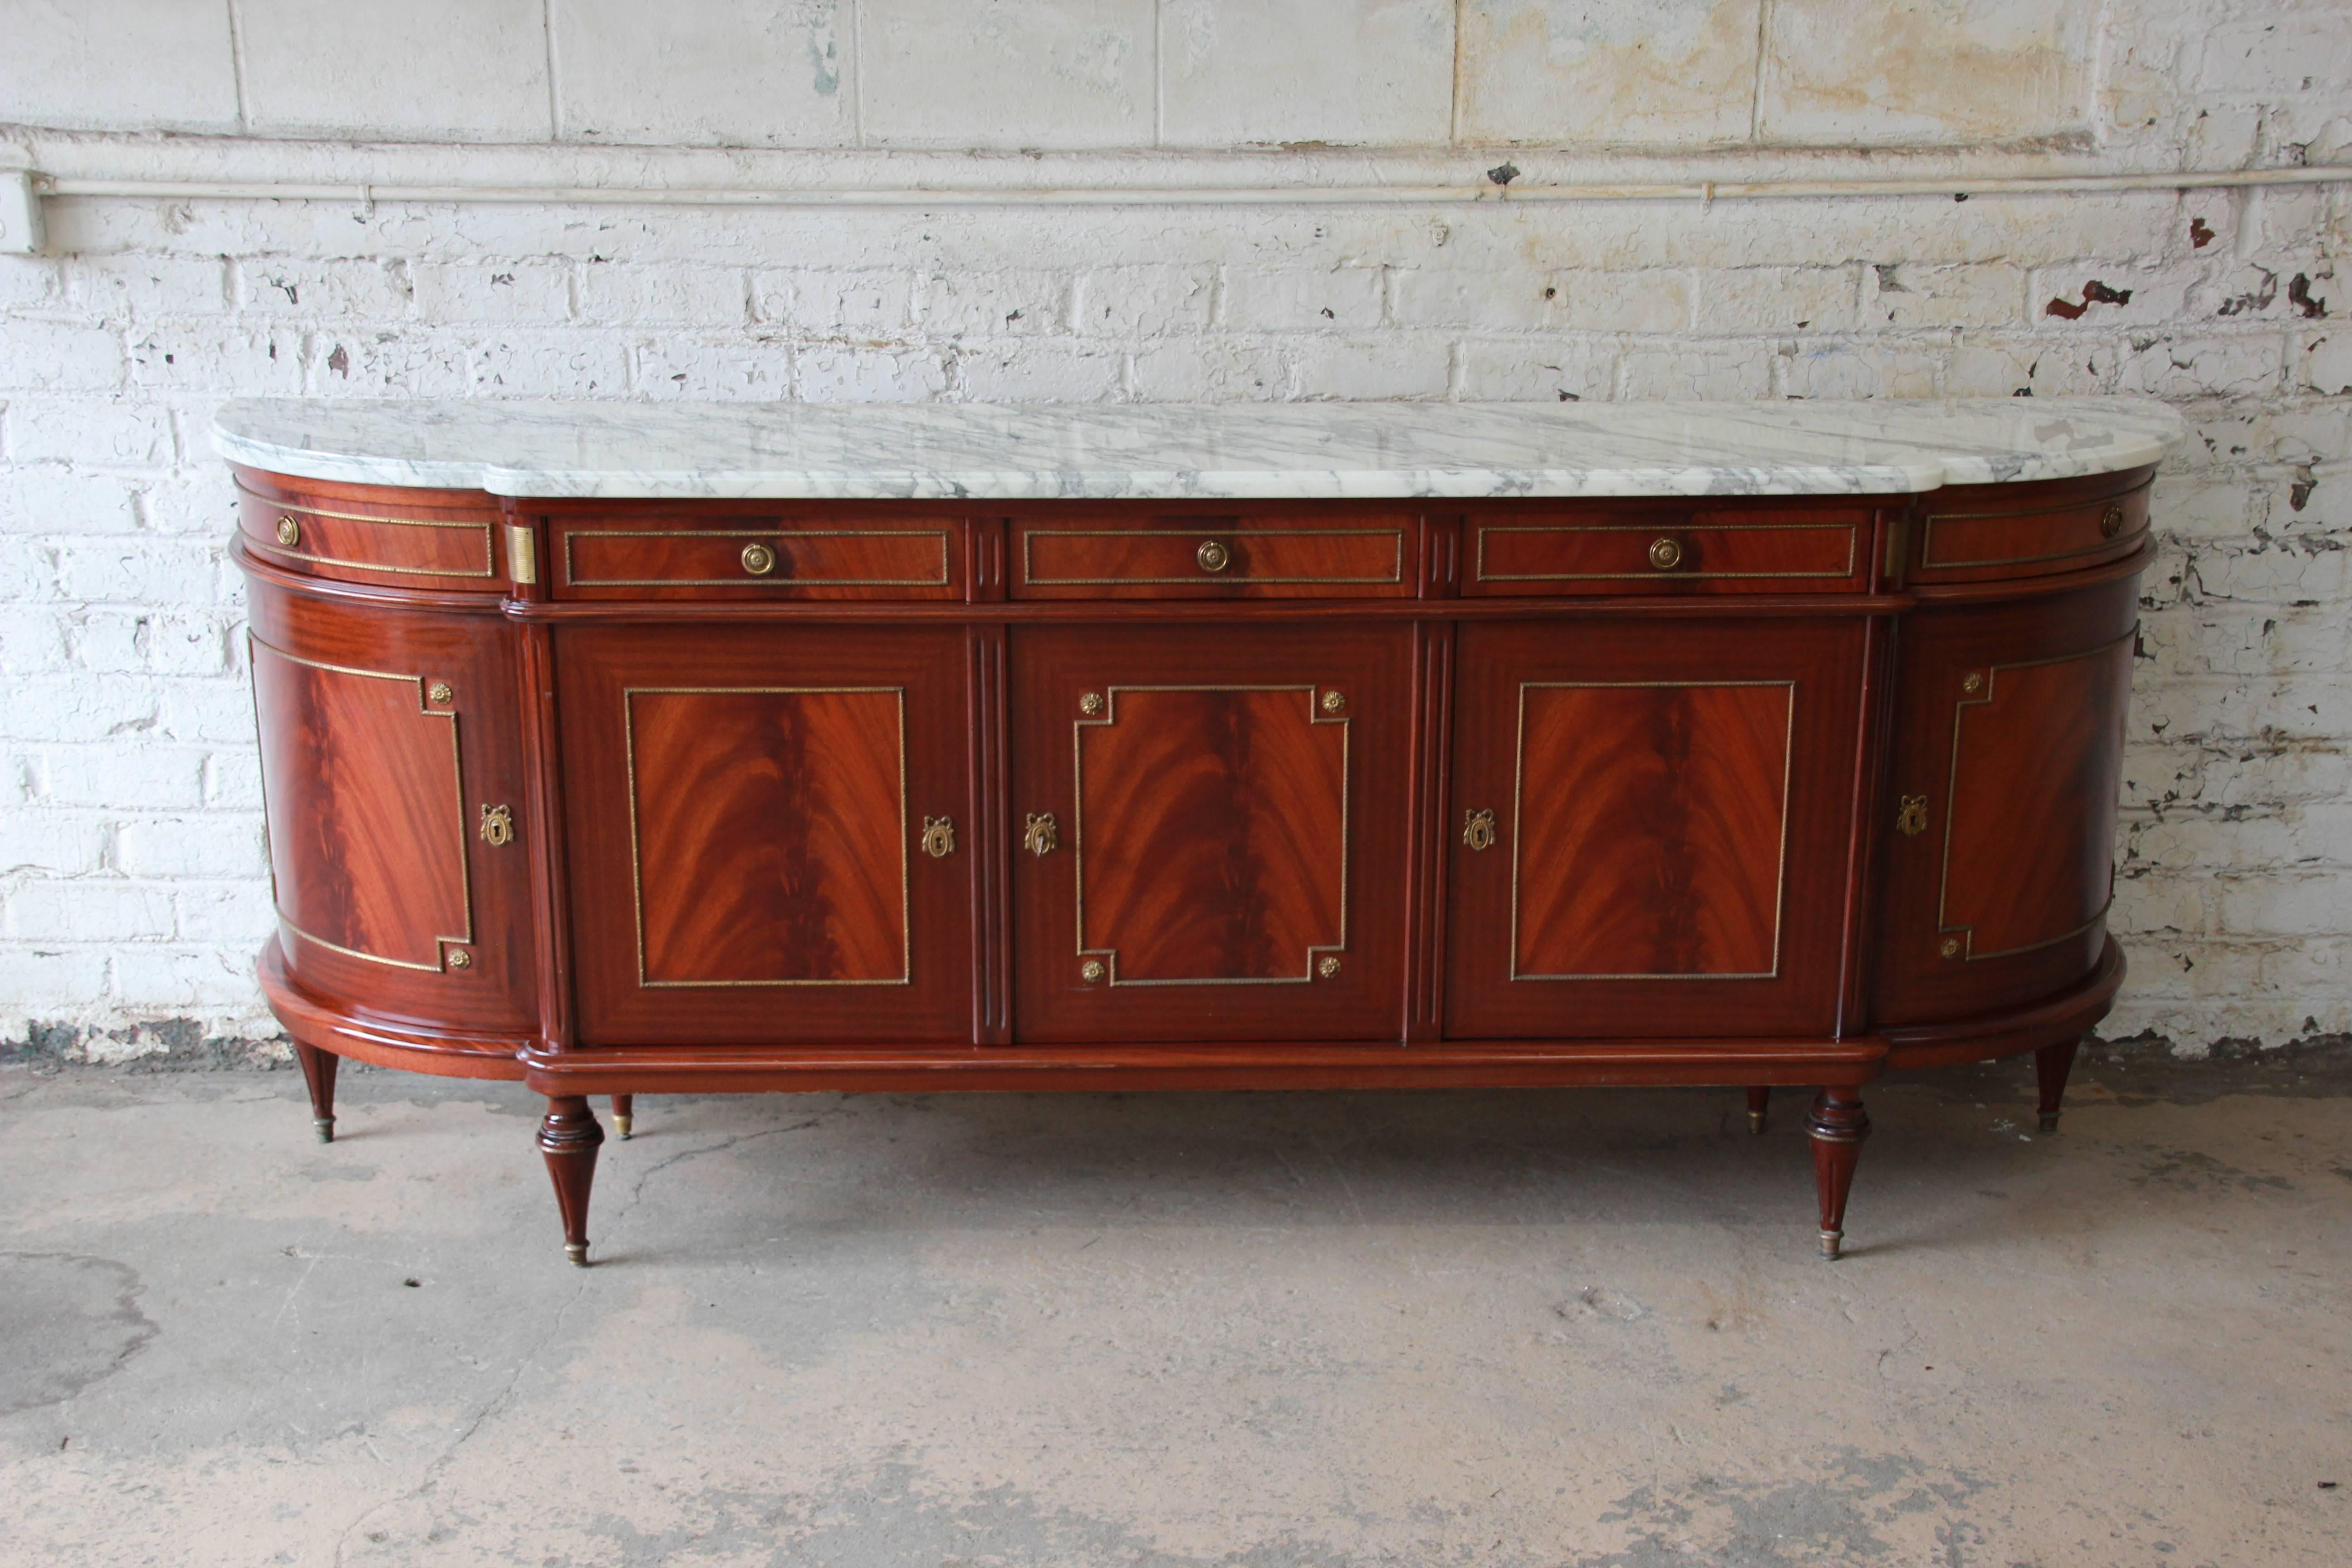 A truly outstanding monumental Maison Jansen marble-top Directoire sideboard or console table in Louis XVI style. This fantastic neoclassical sideboard features stunning flame mahogany wood grain with exquisite bronze-mounted details. It offers